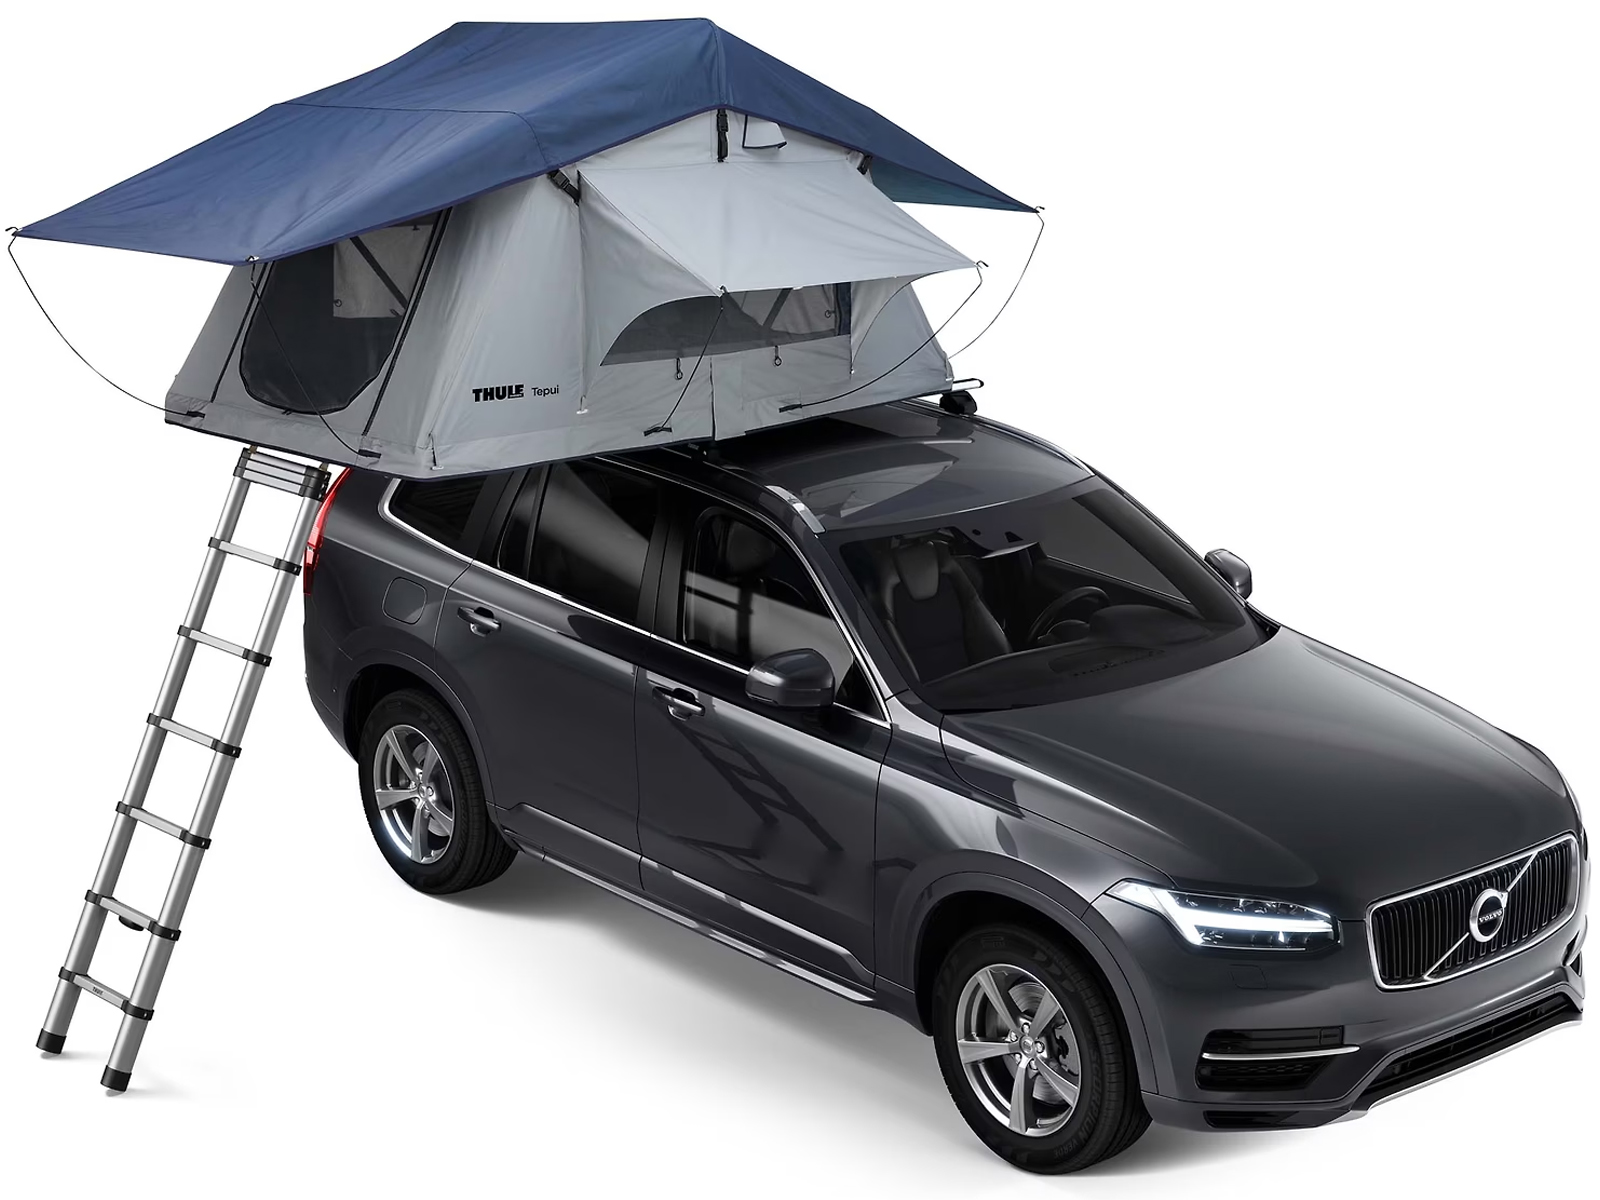 CAR ROOFTOP TENT FOR FORD F-150 – Forza Performance Group